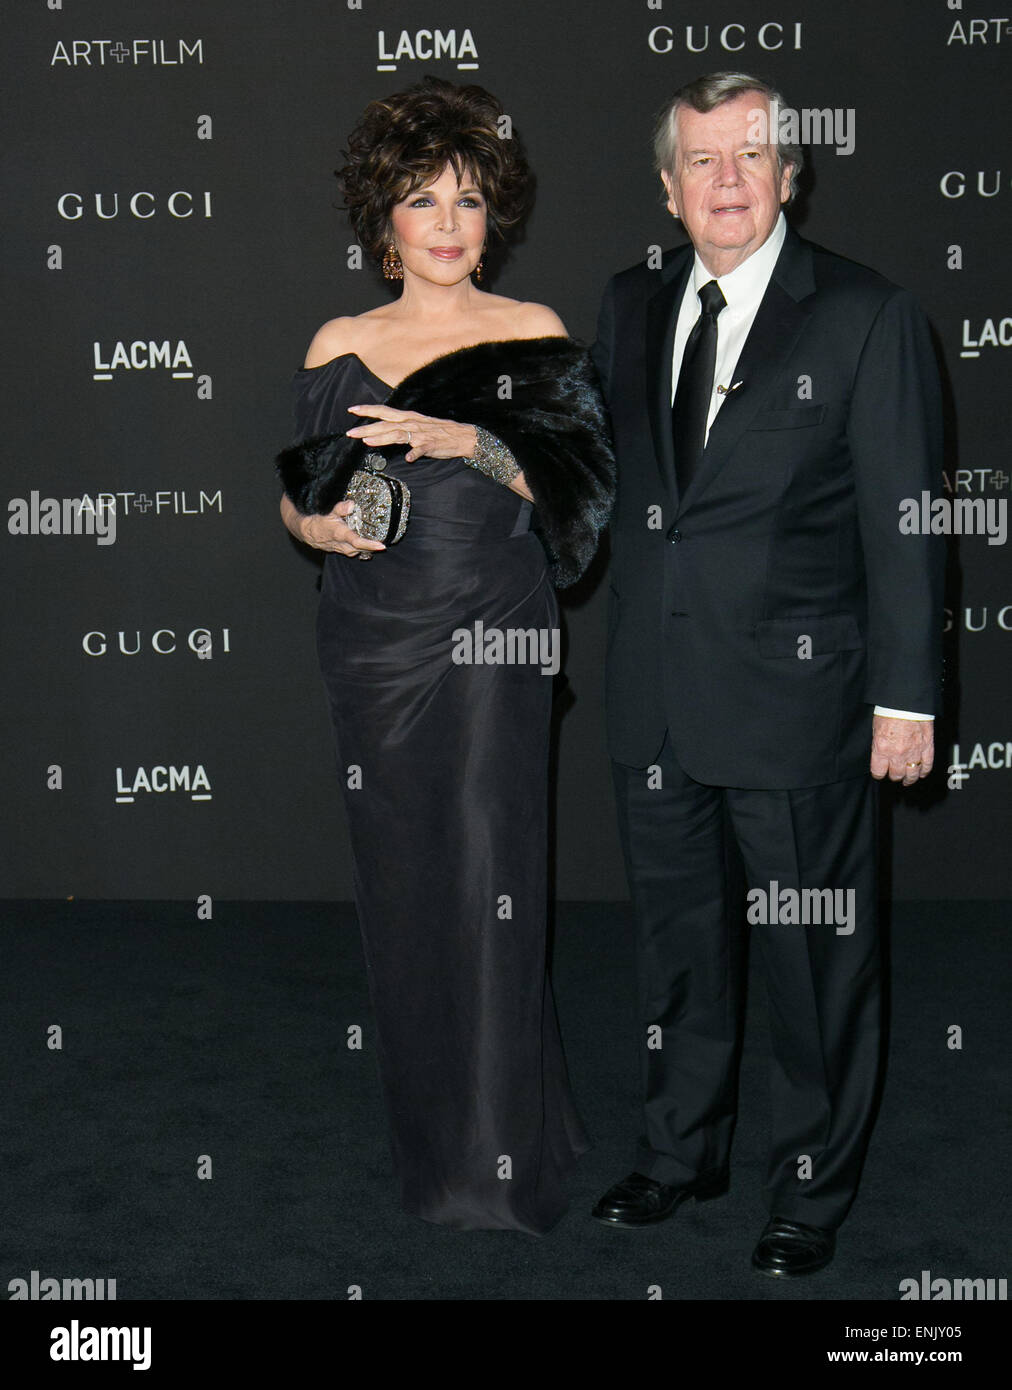 Celebrities attend 2014 LACMA Art + Film Gala honoring Barbara Kruger and Quentin Tarantino presented by Gucci at LACMA.  Featuring: Carole Bayer Sager,Robert A. Daly Where: Los Angeles, California, United States When: 01 Nov 2014 Stock Photo